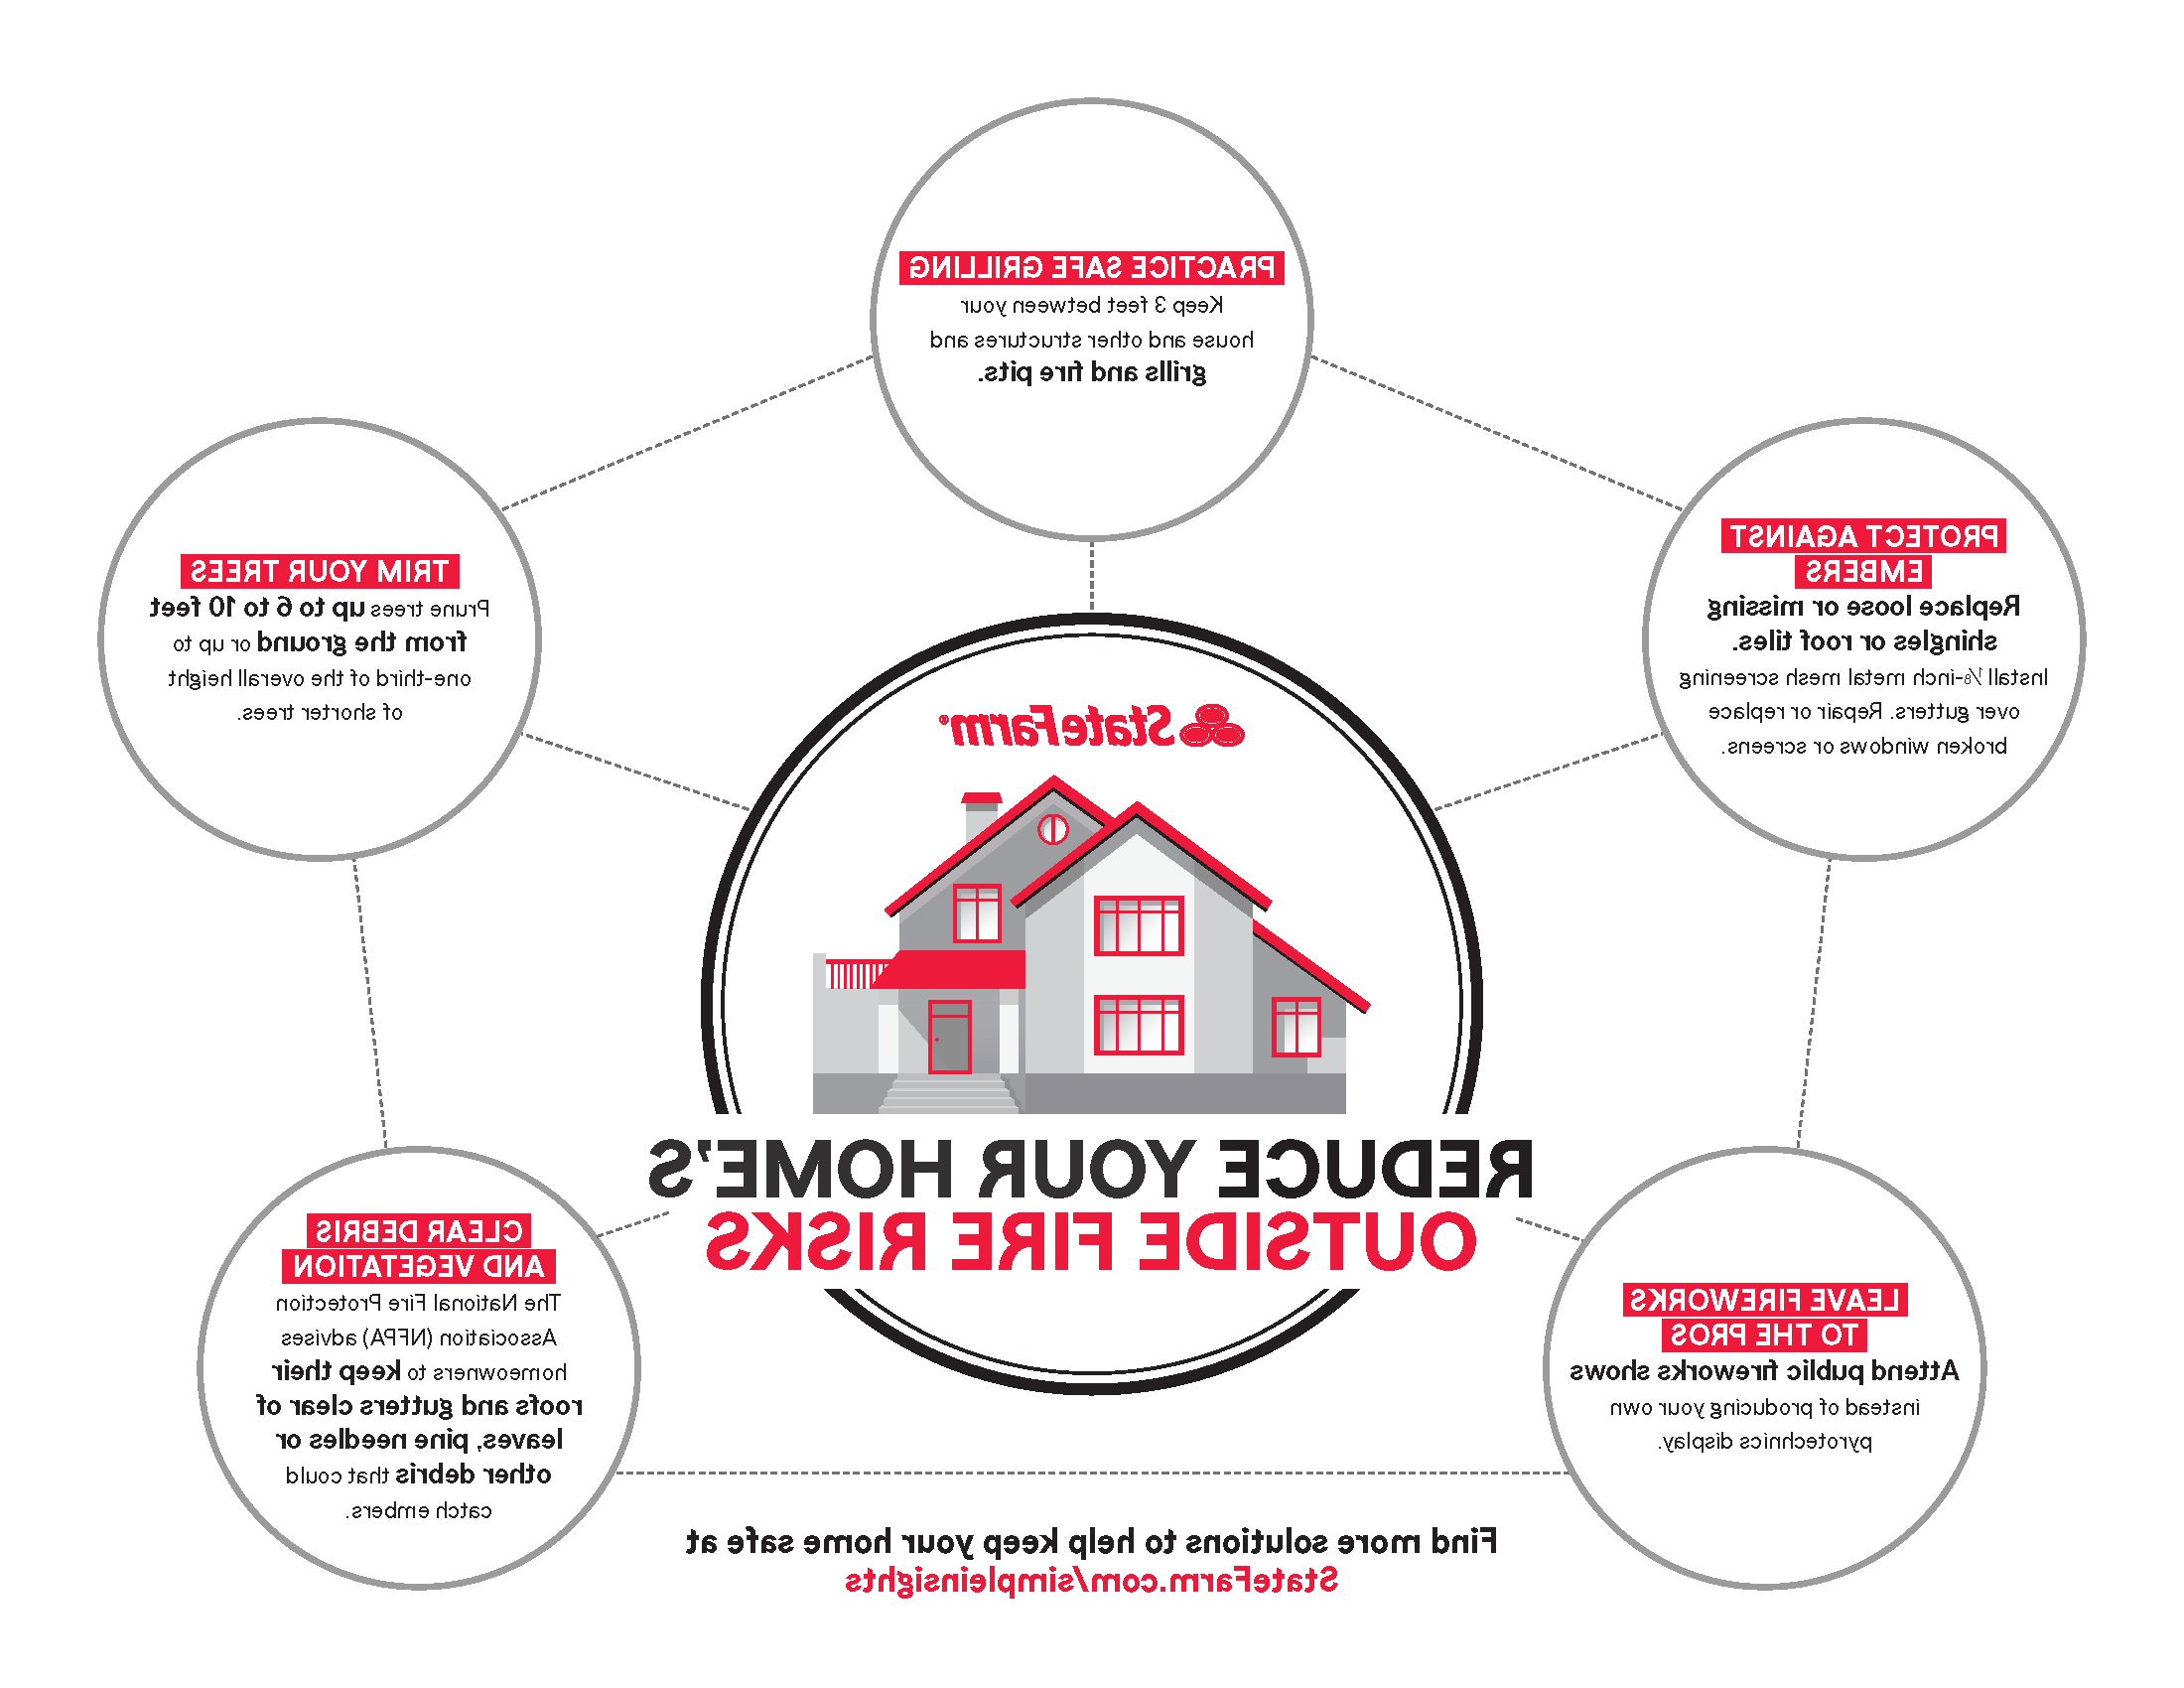 Infographic displaying five ouside fire risks.